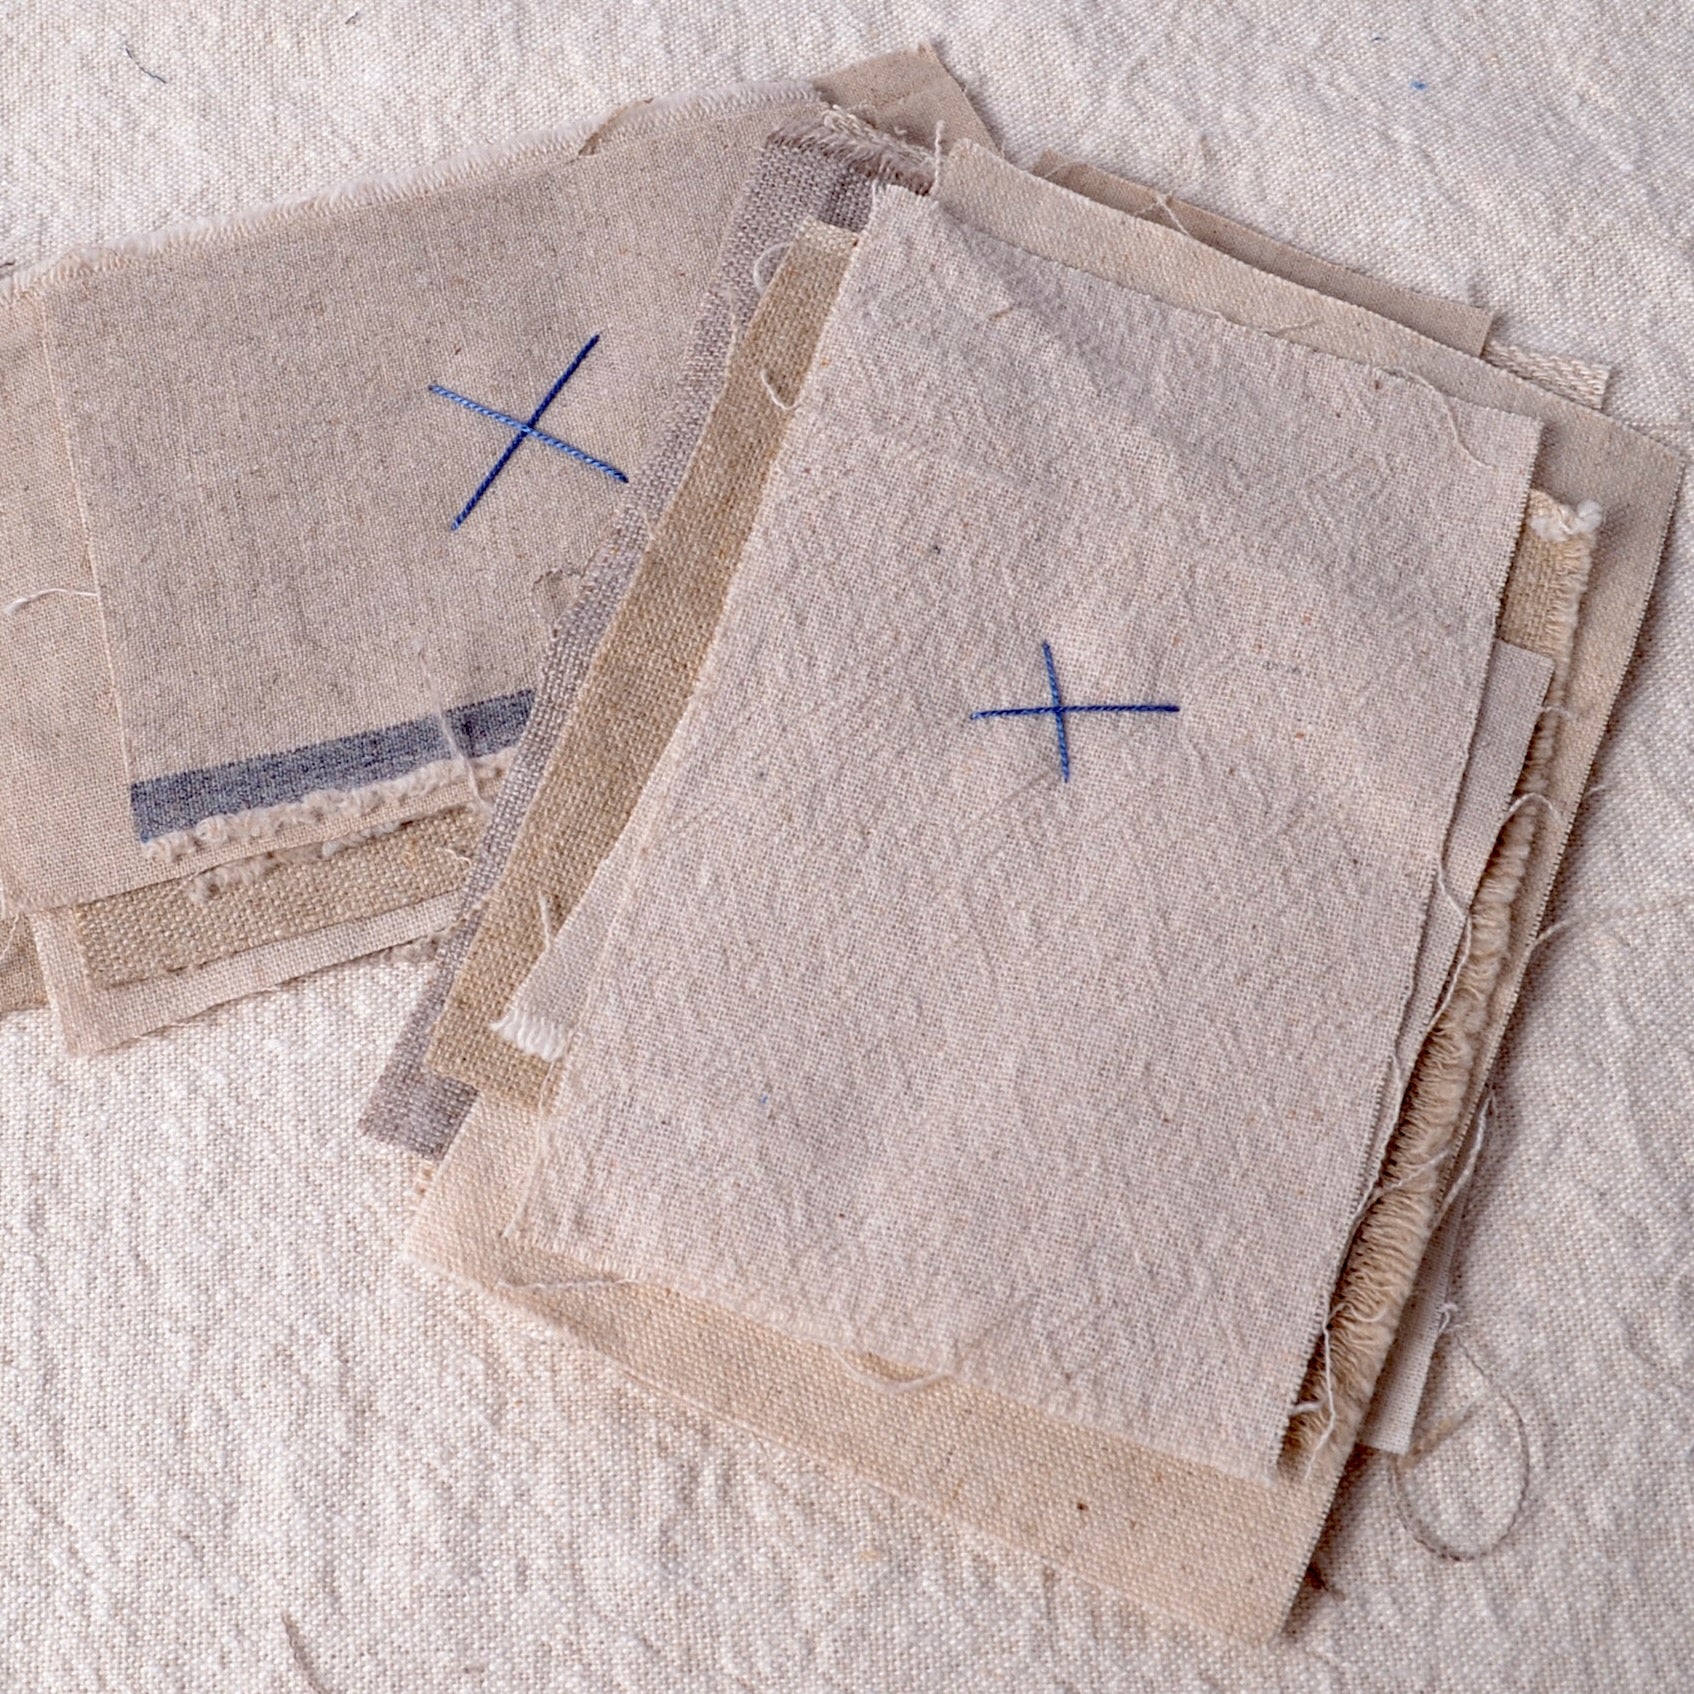 Natural Linen & Cotton Patches for Mending or Stitching